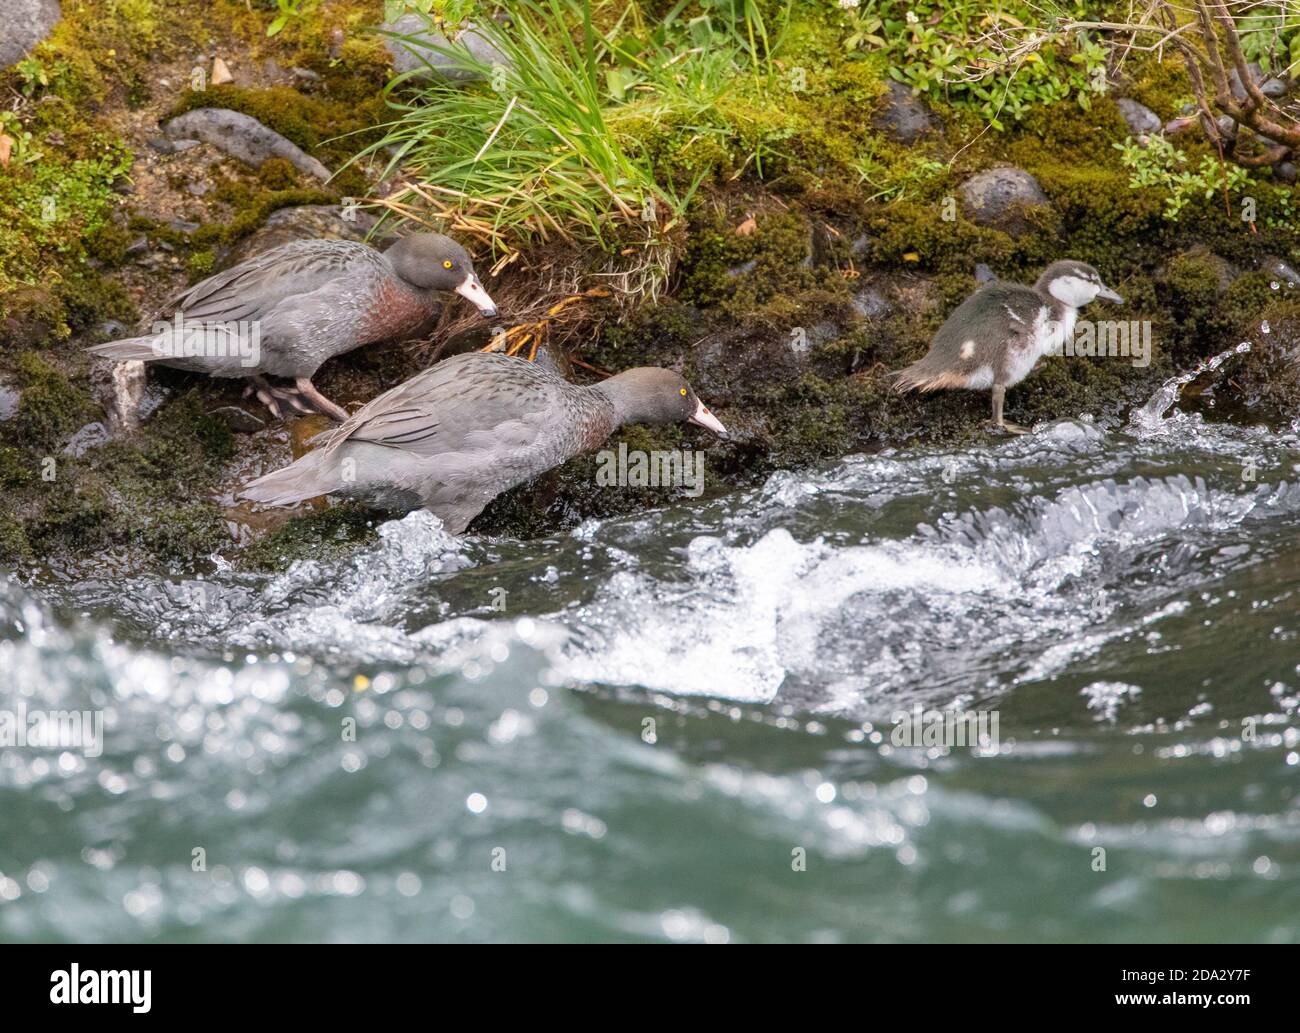 Blue duck, Whio (Hymenolaimus malacorhynchos), duck family at the shore of a streaming river, New Zealand, Northern Island, Turangi Stock Photo